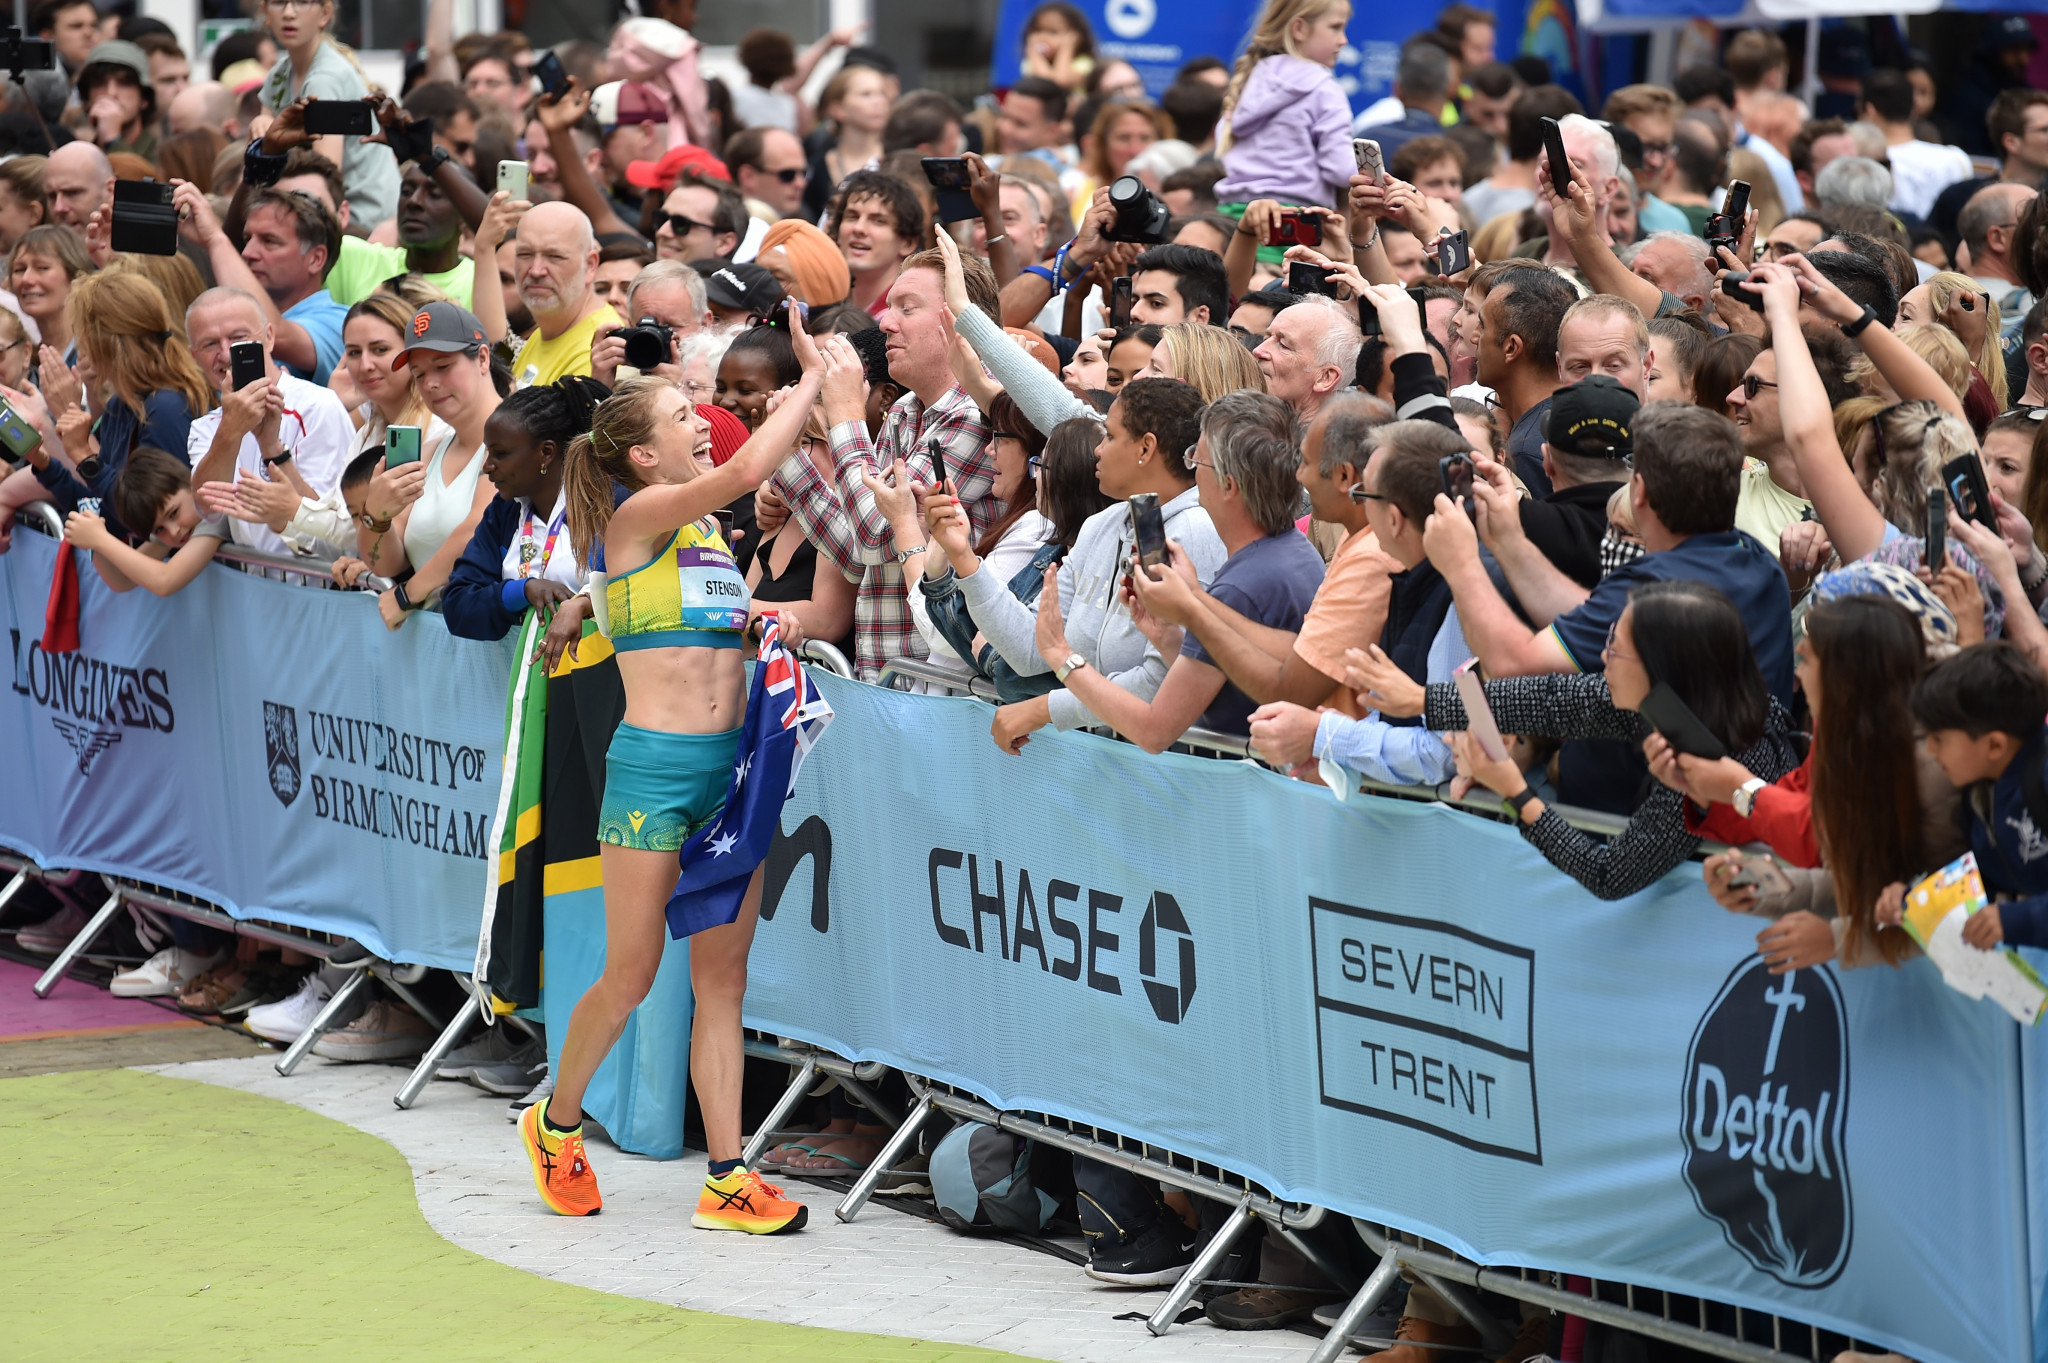 Thousands of fans have turned out for what is one of the first multi-sport events to be staged in front of packed crowds since the COVID-19 pandemic ©Getty Images